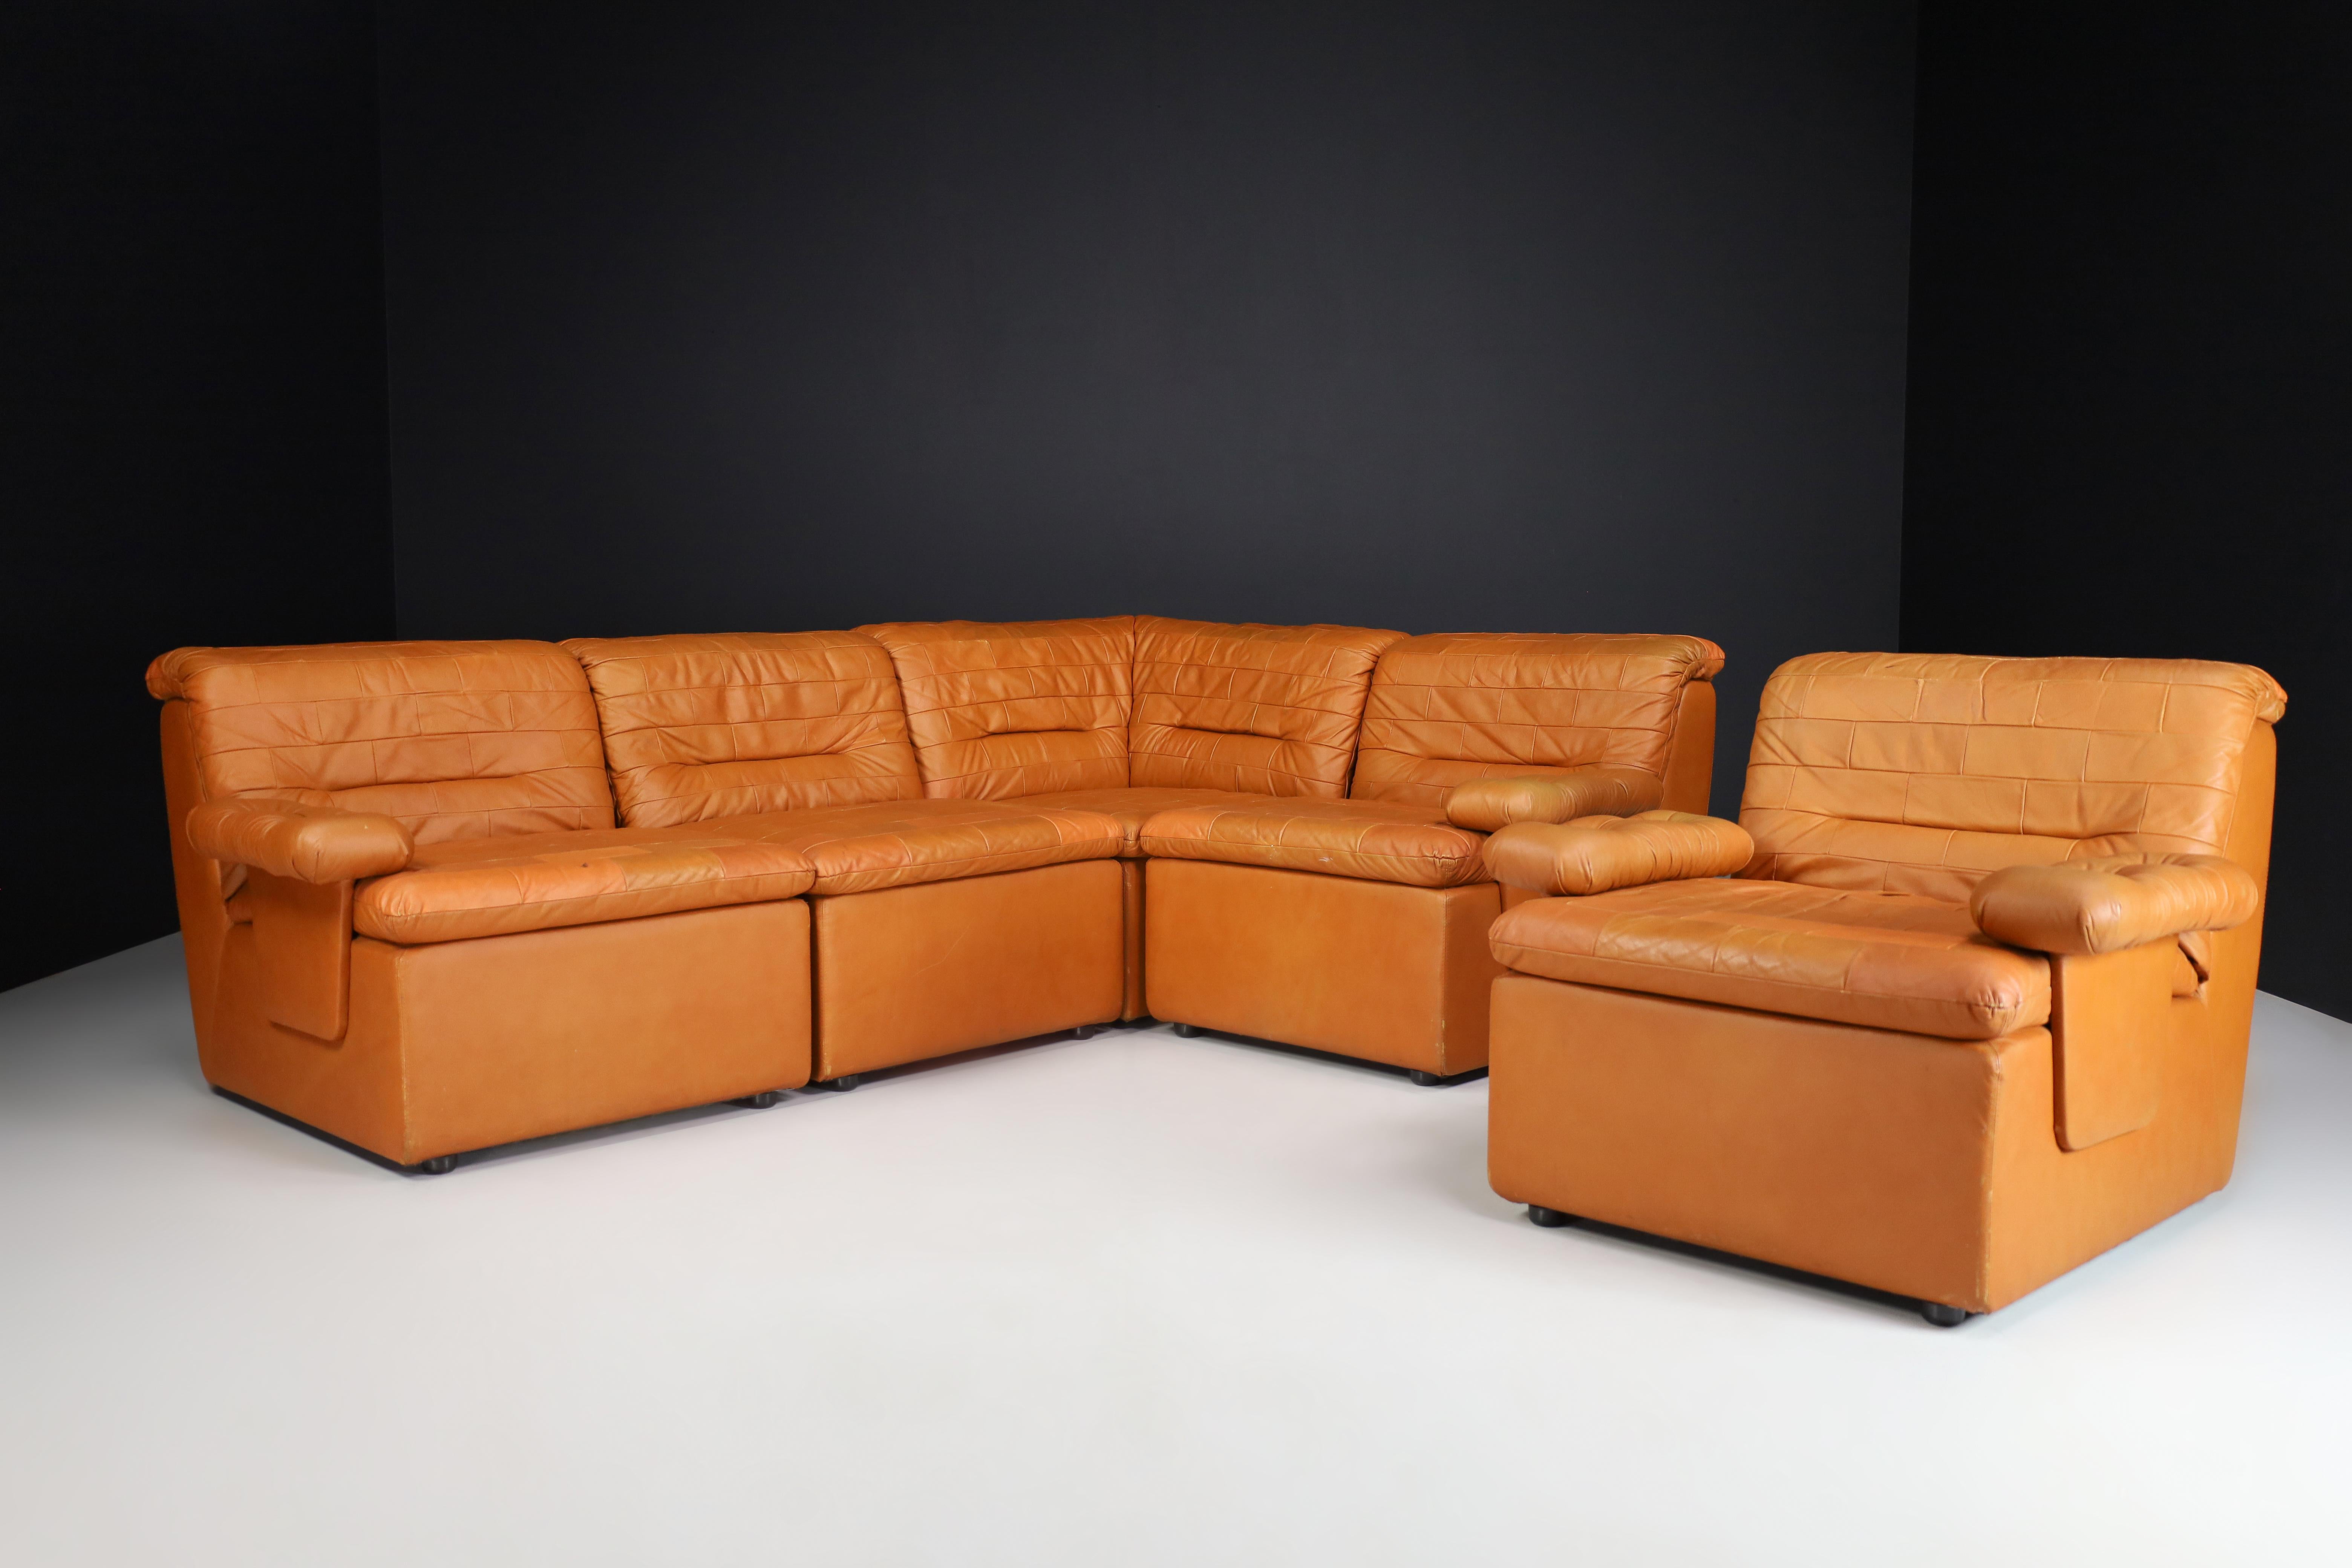 Mid-Century Modern leather patchwork lounge sofa/living room set/5, Switzerland 1960s.

Mid-Century Modern leather patchwork lounge Sofa/living room set manufactured and designed in Switzerland 1960s. It is in beautiful vintage condition, with a